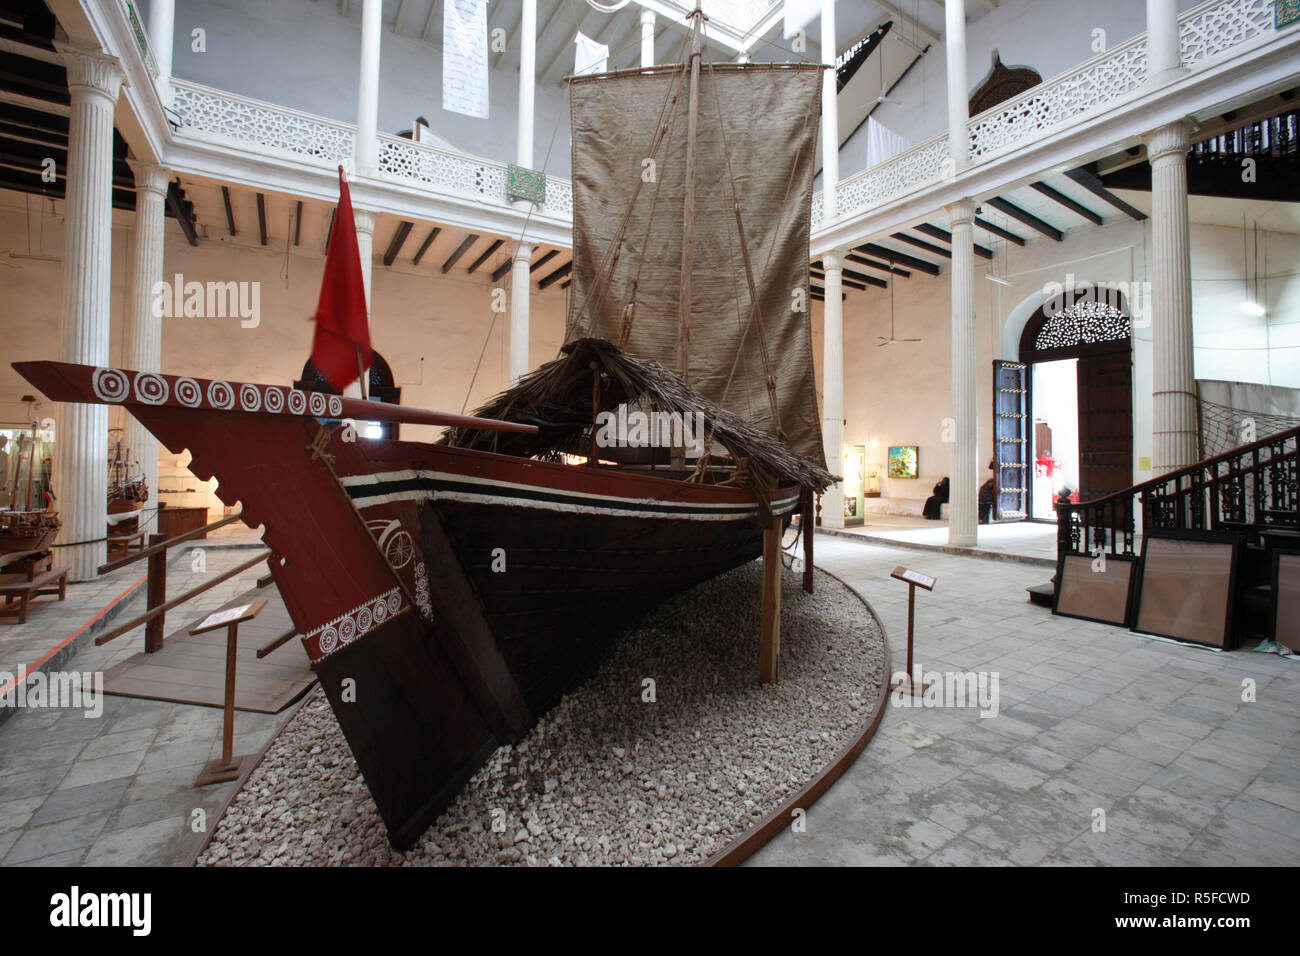 Zanzibar, Tanzania. A Traditional Dhow boat on dislay inside The House of Wonders National Museum in Stone Town Stock Photo